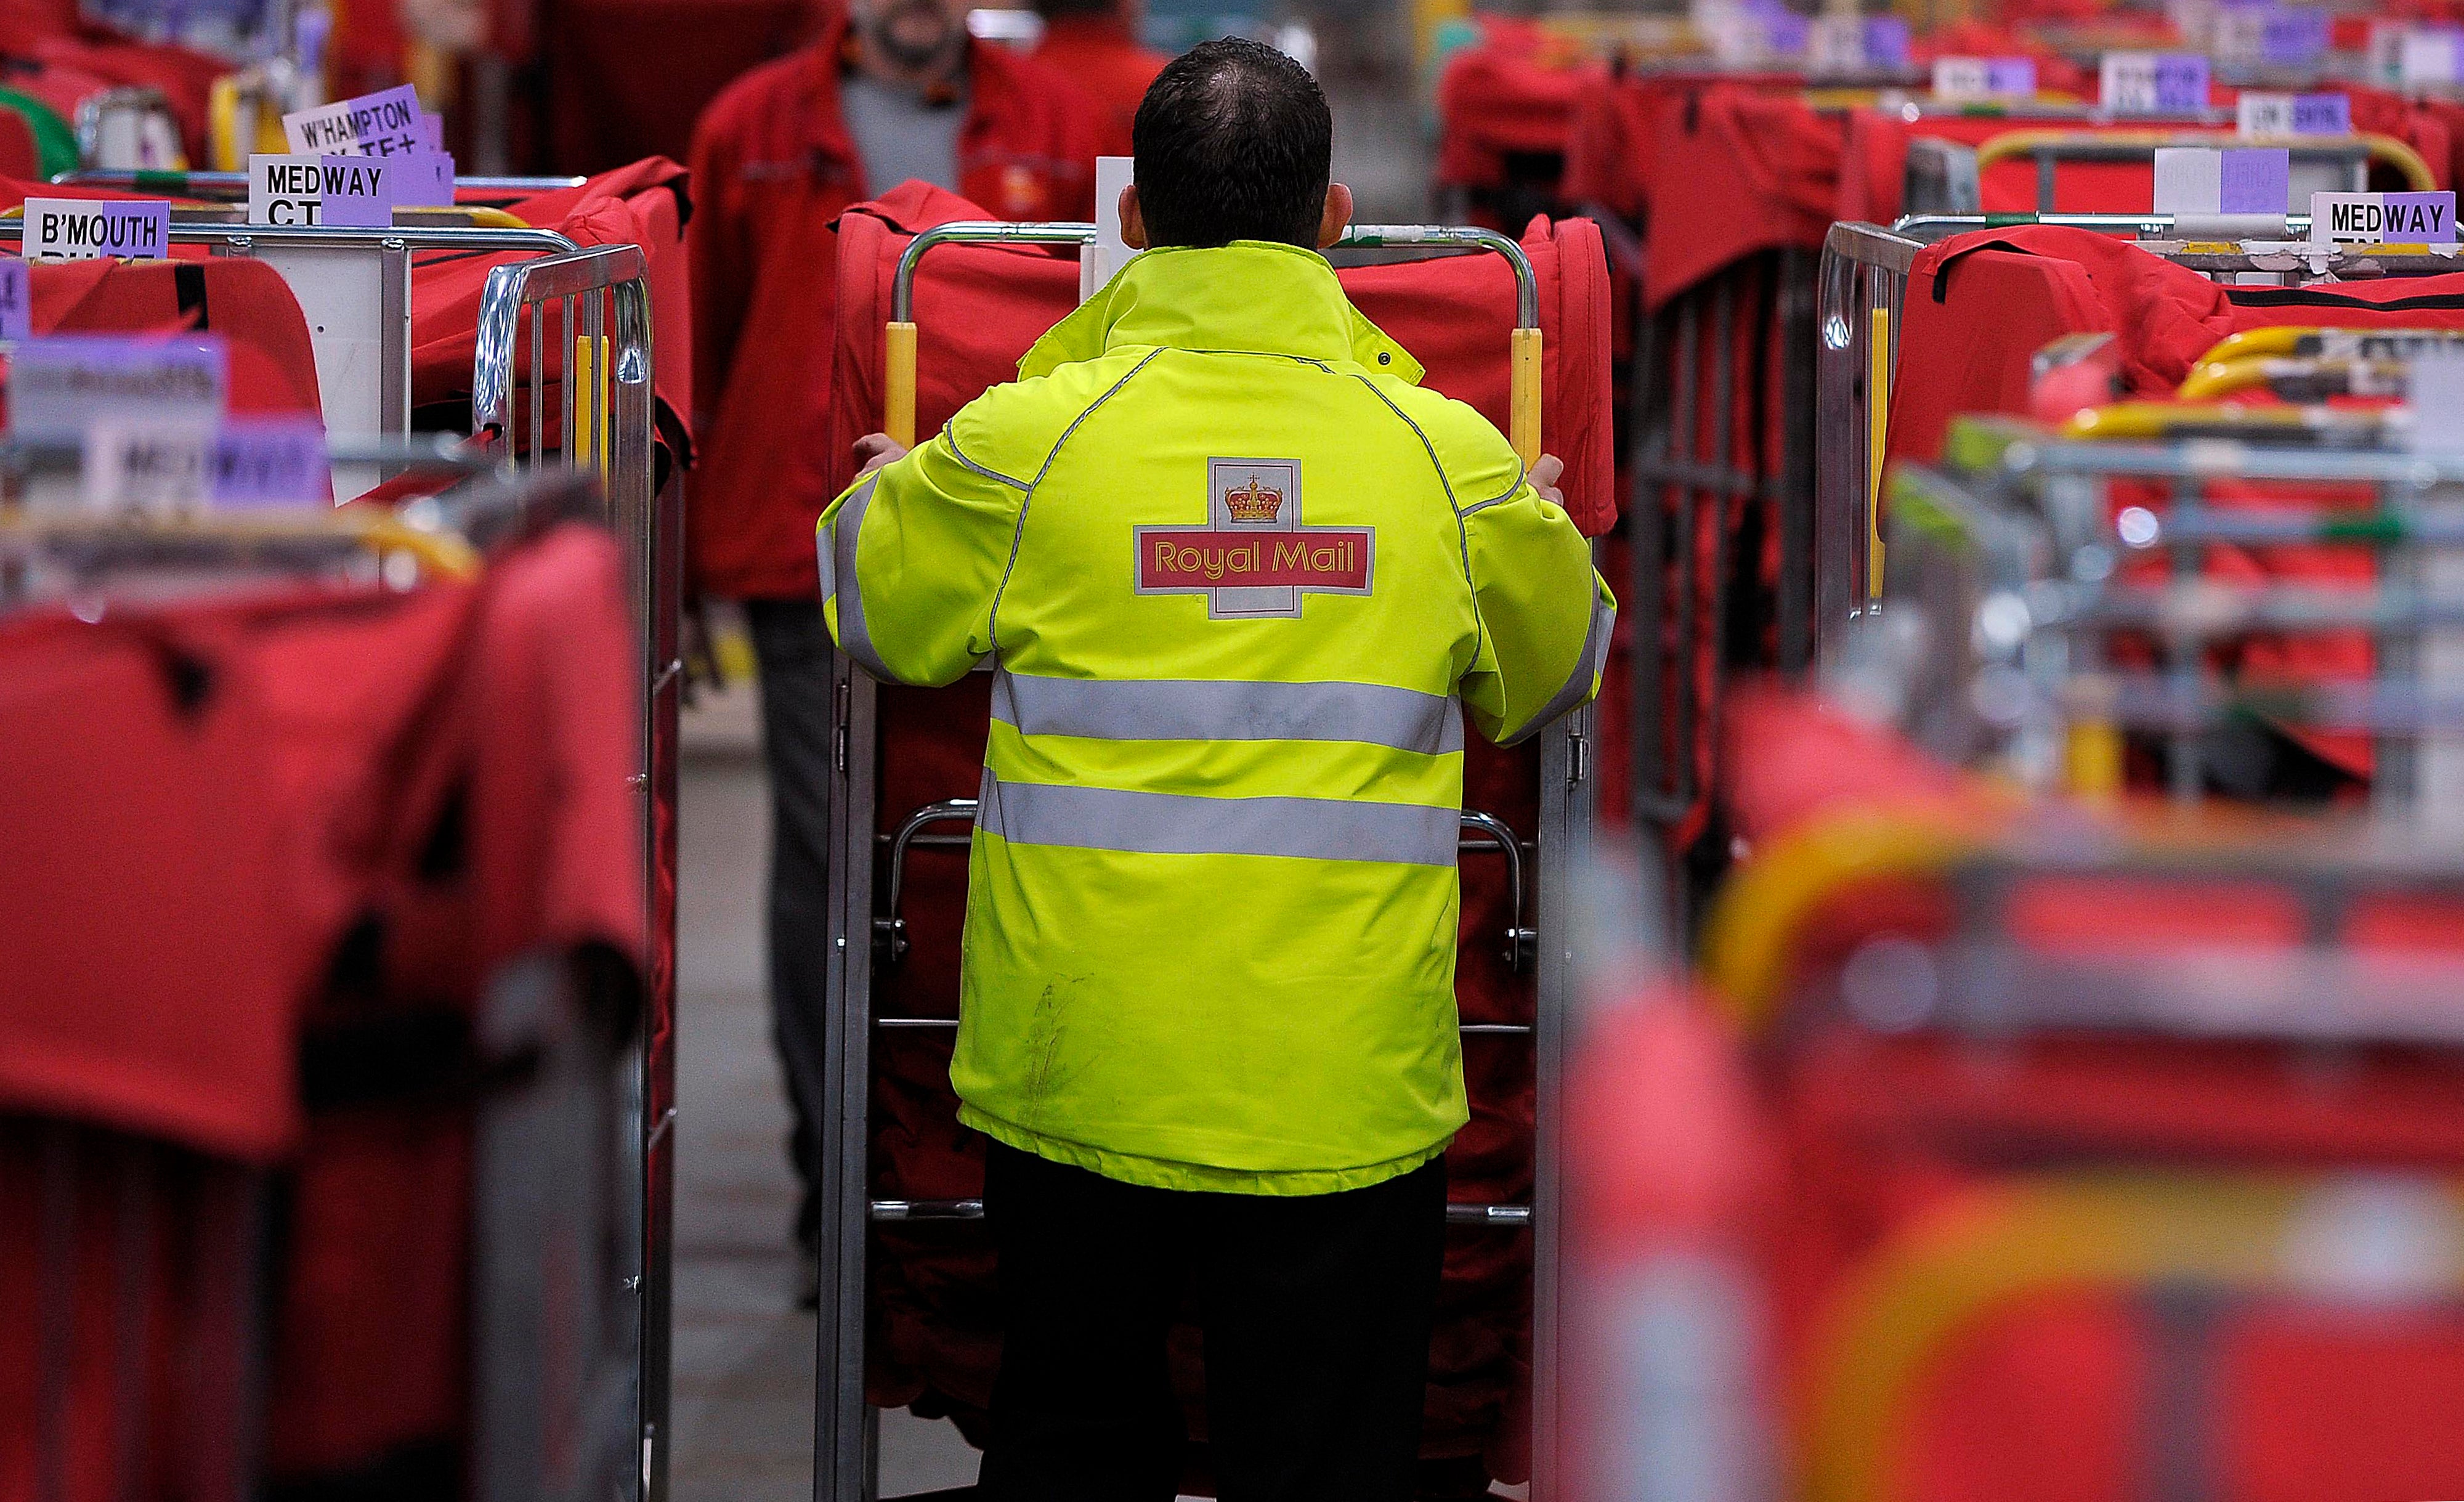 Royal Mail could stop postal deliveries on Saturdays under reforms to save money